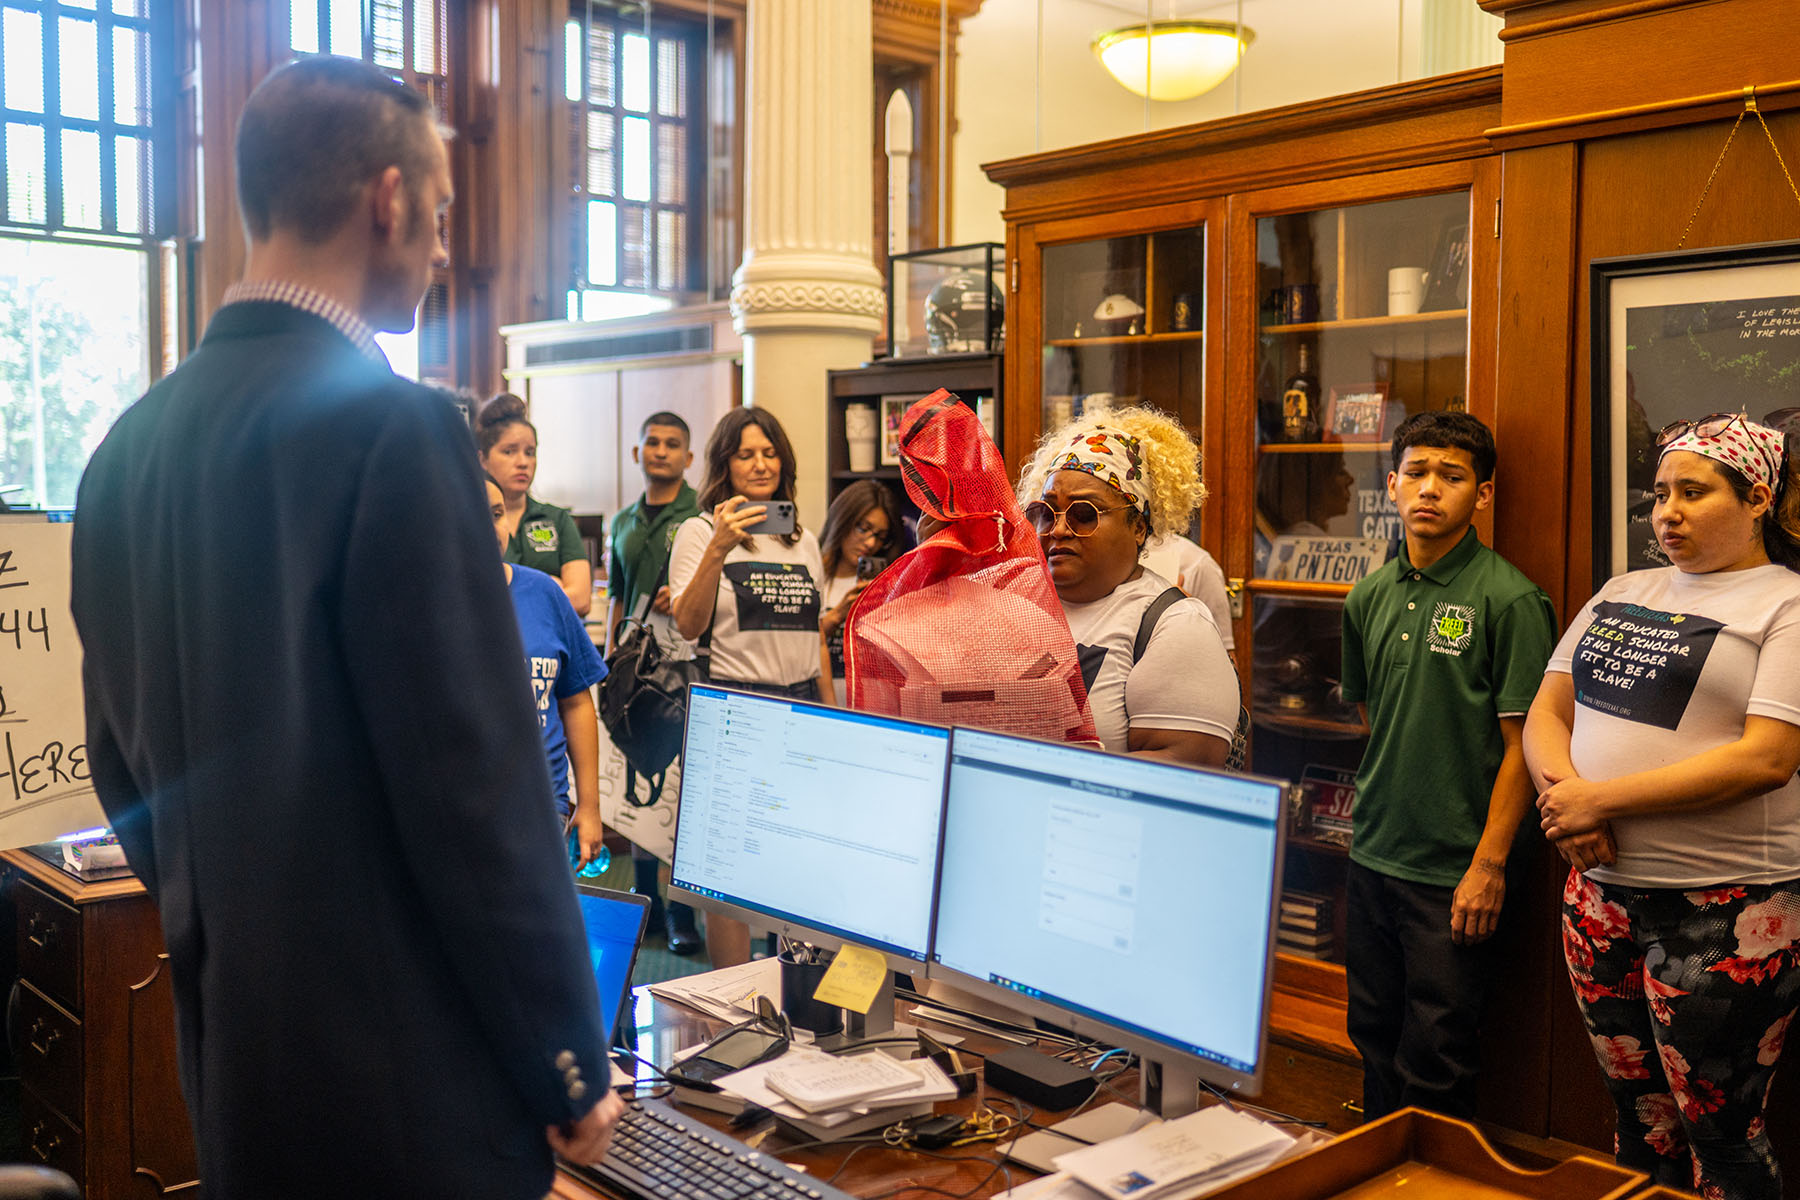 Activists deliver letters from incarcerated people to lawmakers during a visit to the Texas State Capitol.